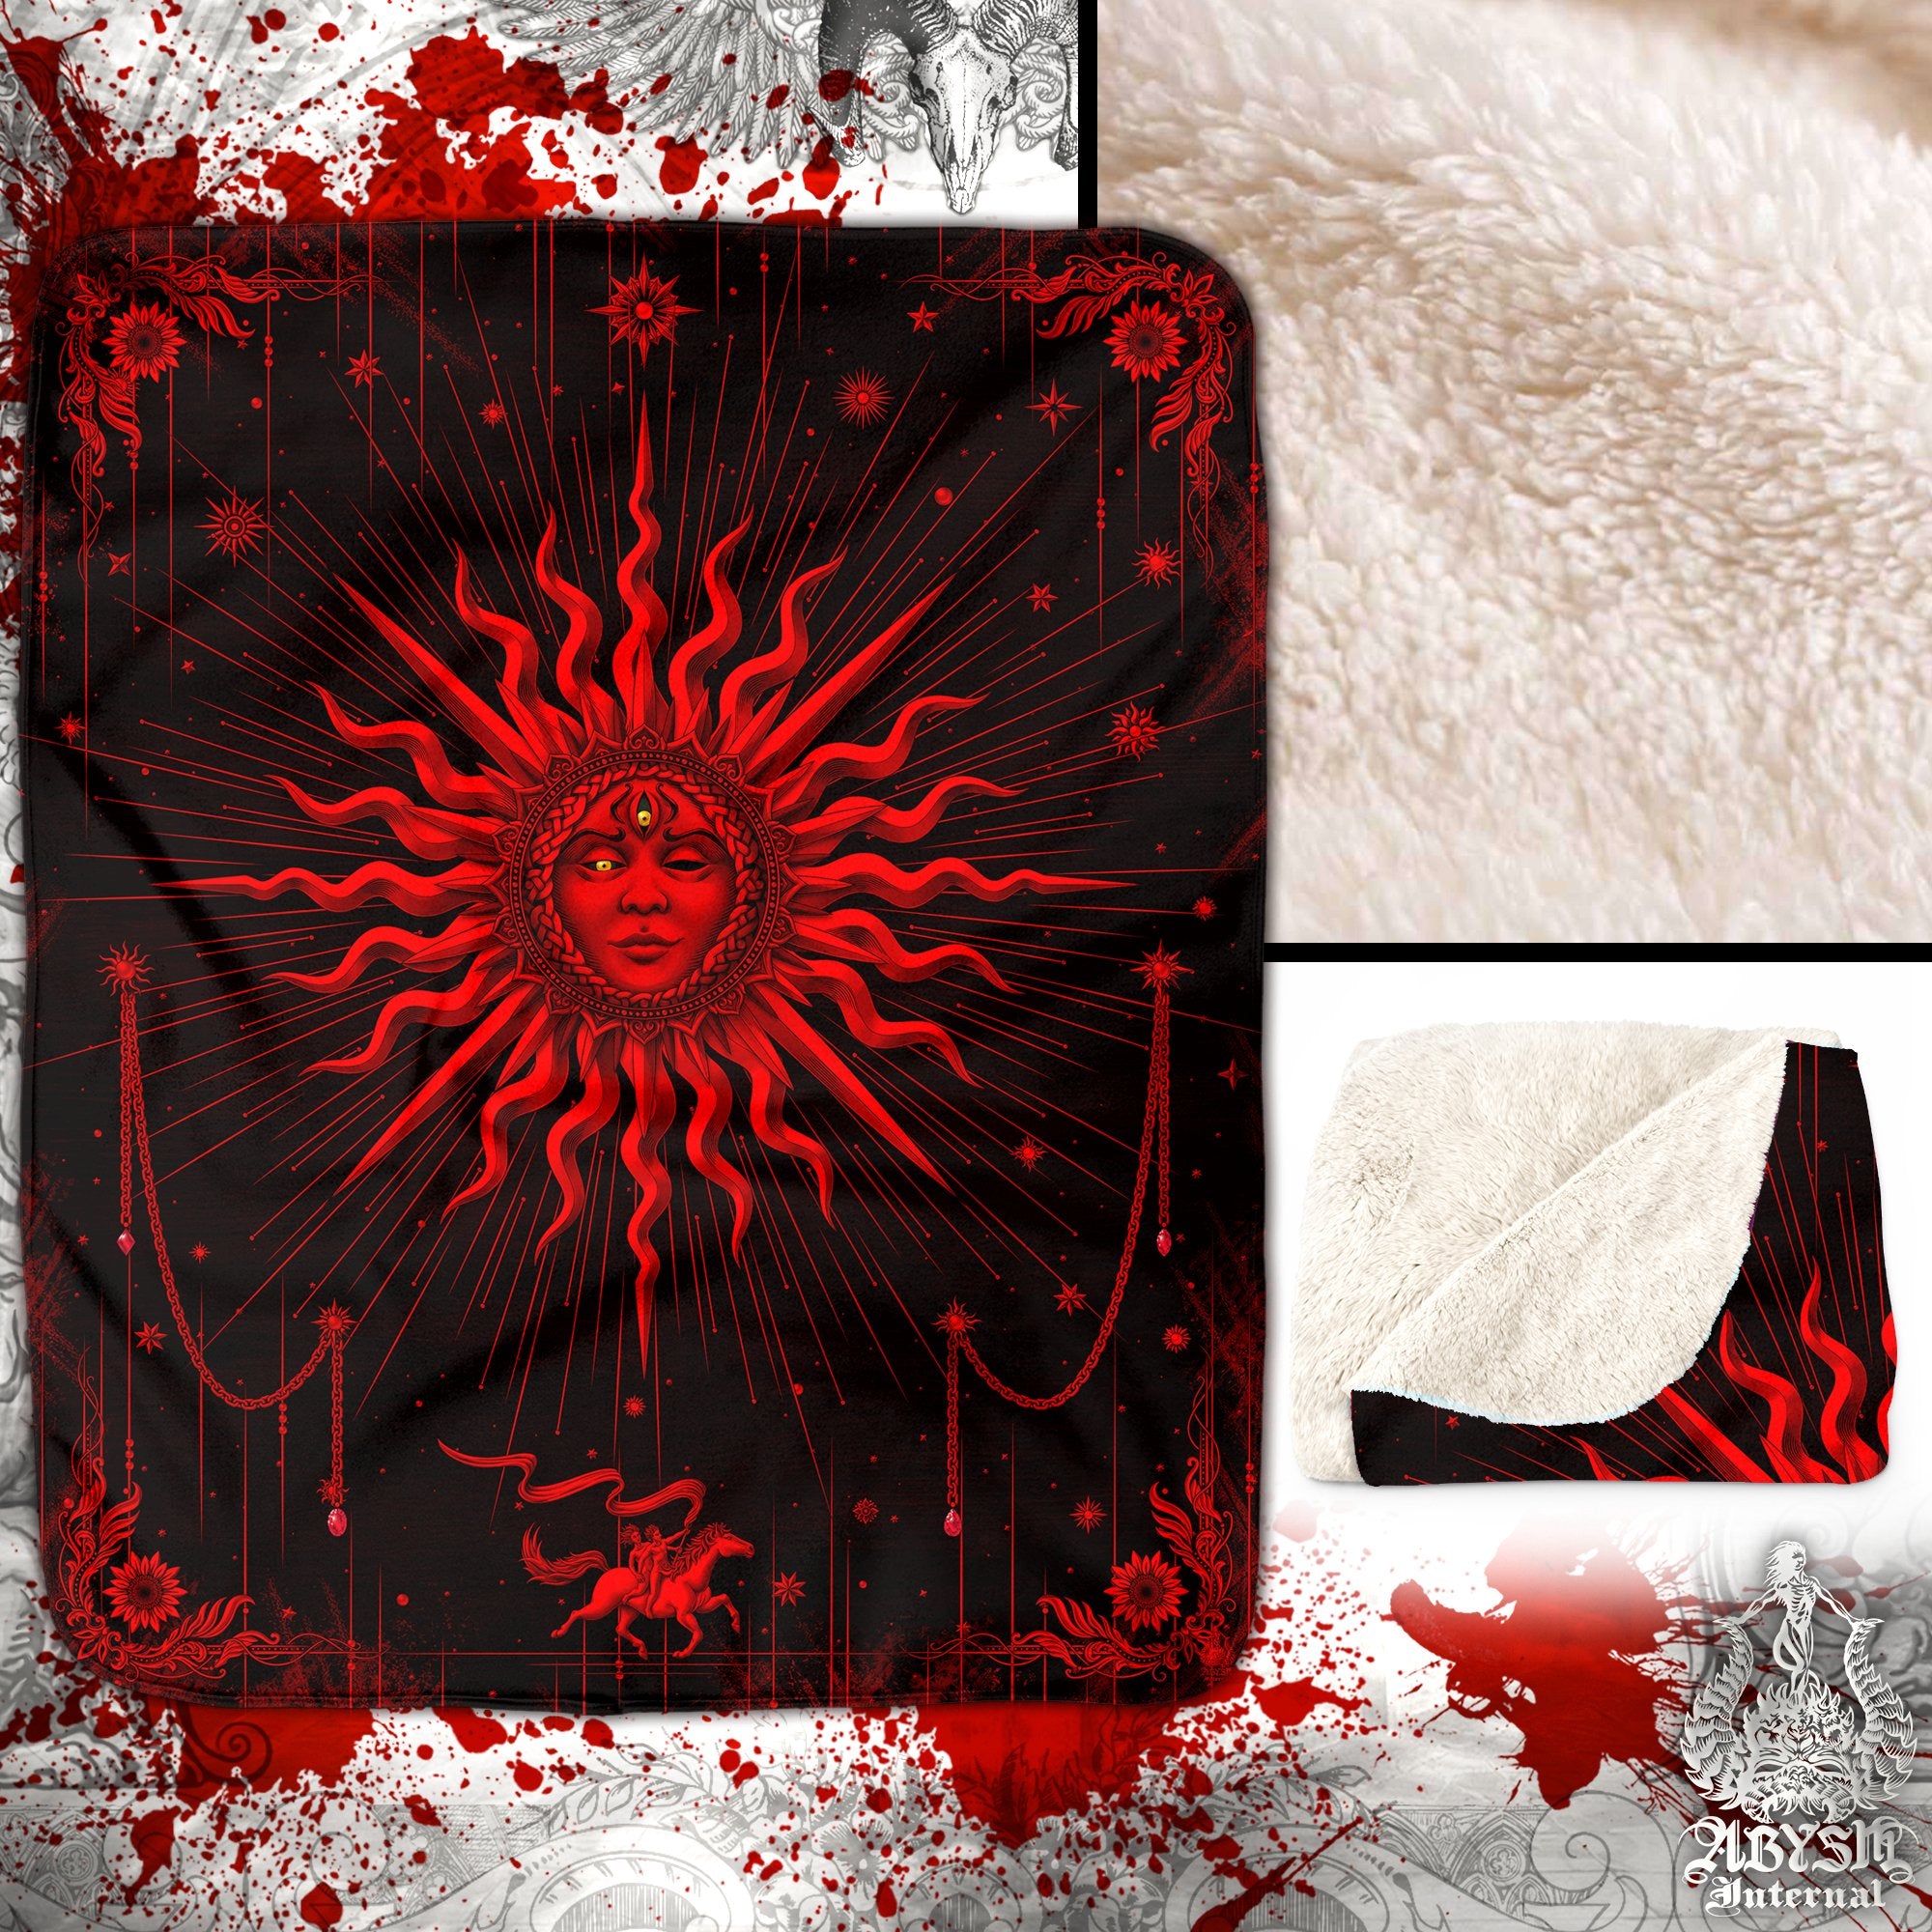 Gothic Sun Sherpa Fleece Throw Blanket, Witch's Magic Esoteric Room, Goth Tarot Arcana Art, Black and Red Home Decor, Fortune Gift - Abysm Internal